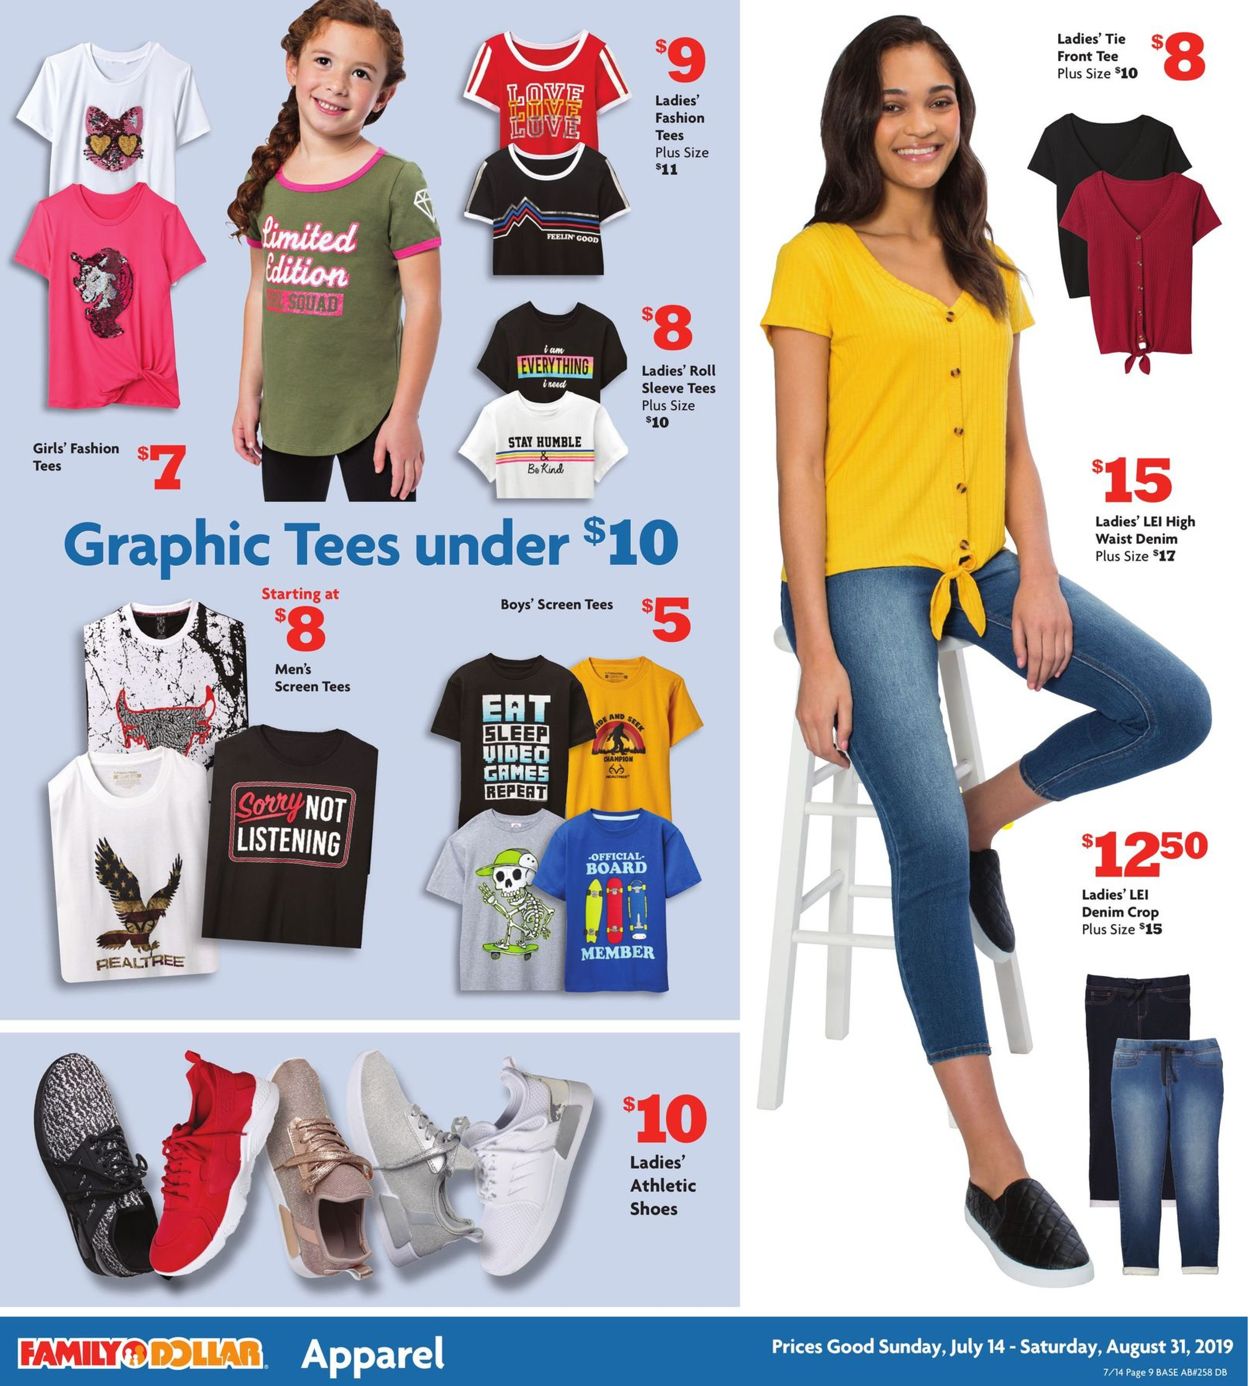 Family Dollar Current weekly ad 07/14 - 07/20/2019 [13] - frequent-ads.com